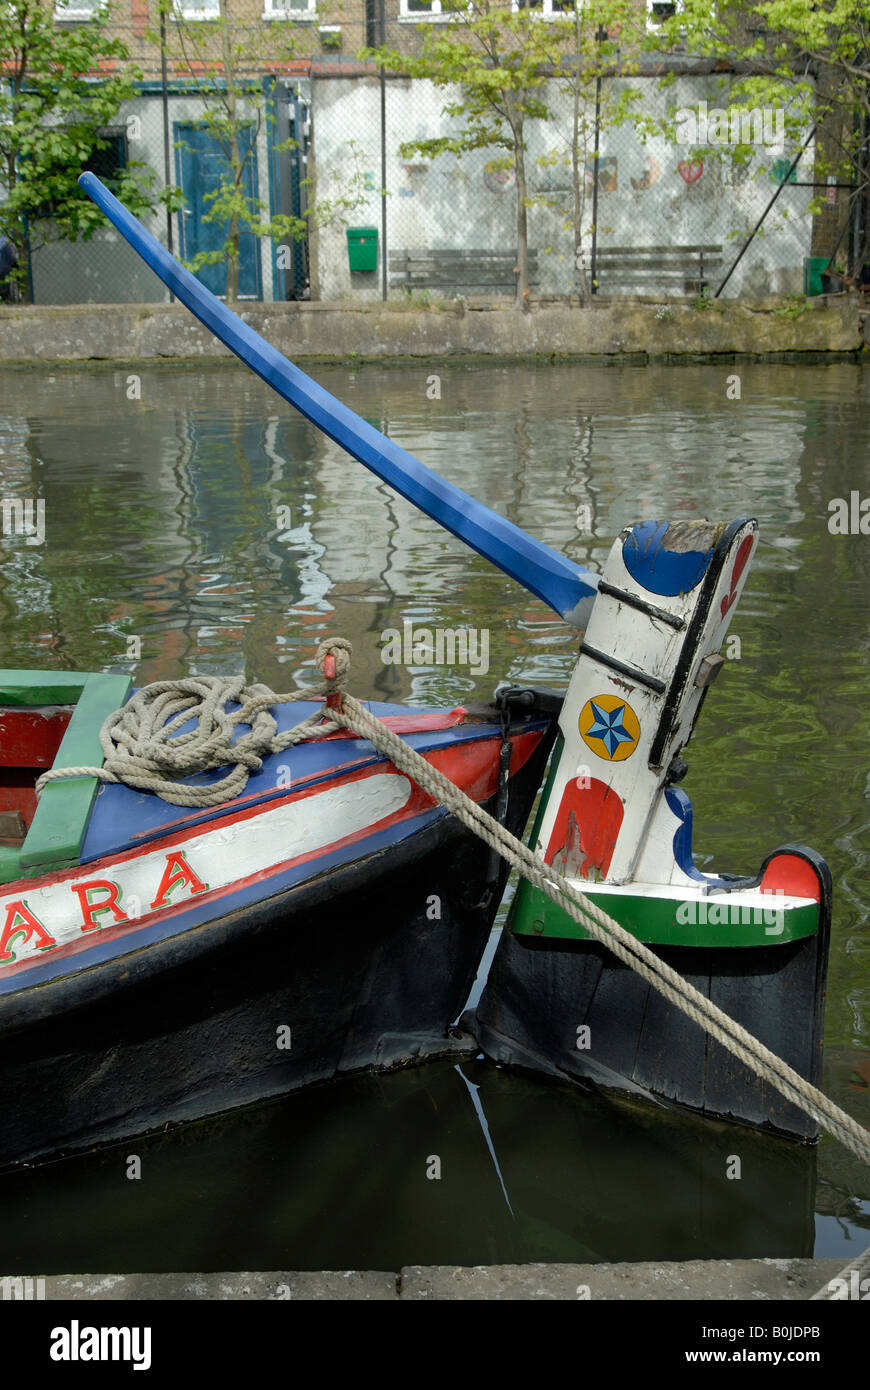 Old wooden rudder and tiller on decorated narrowboat butty, Little Venice, London, England Stock Photo